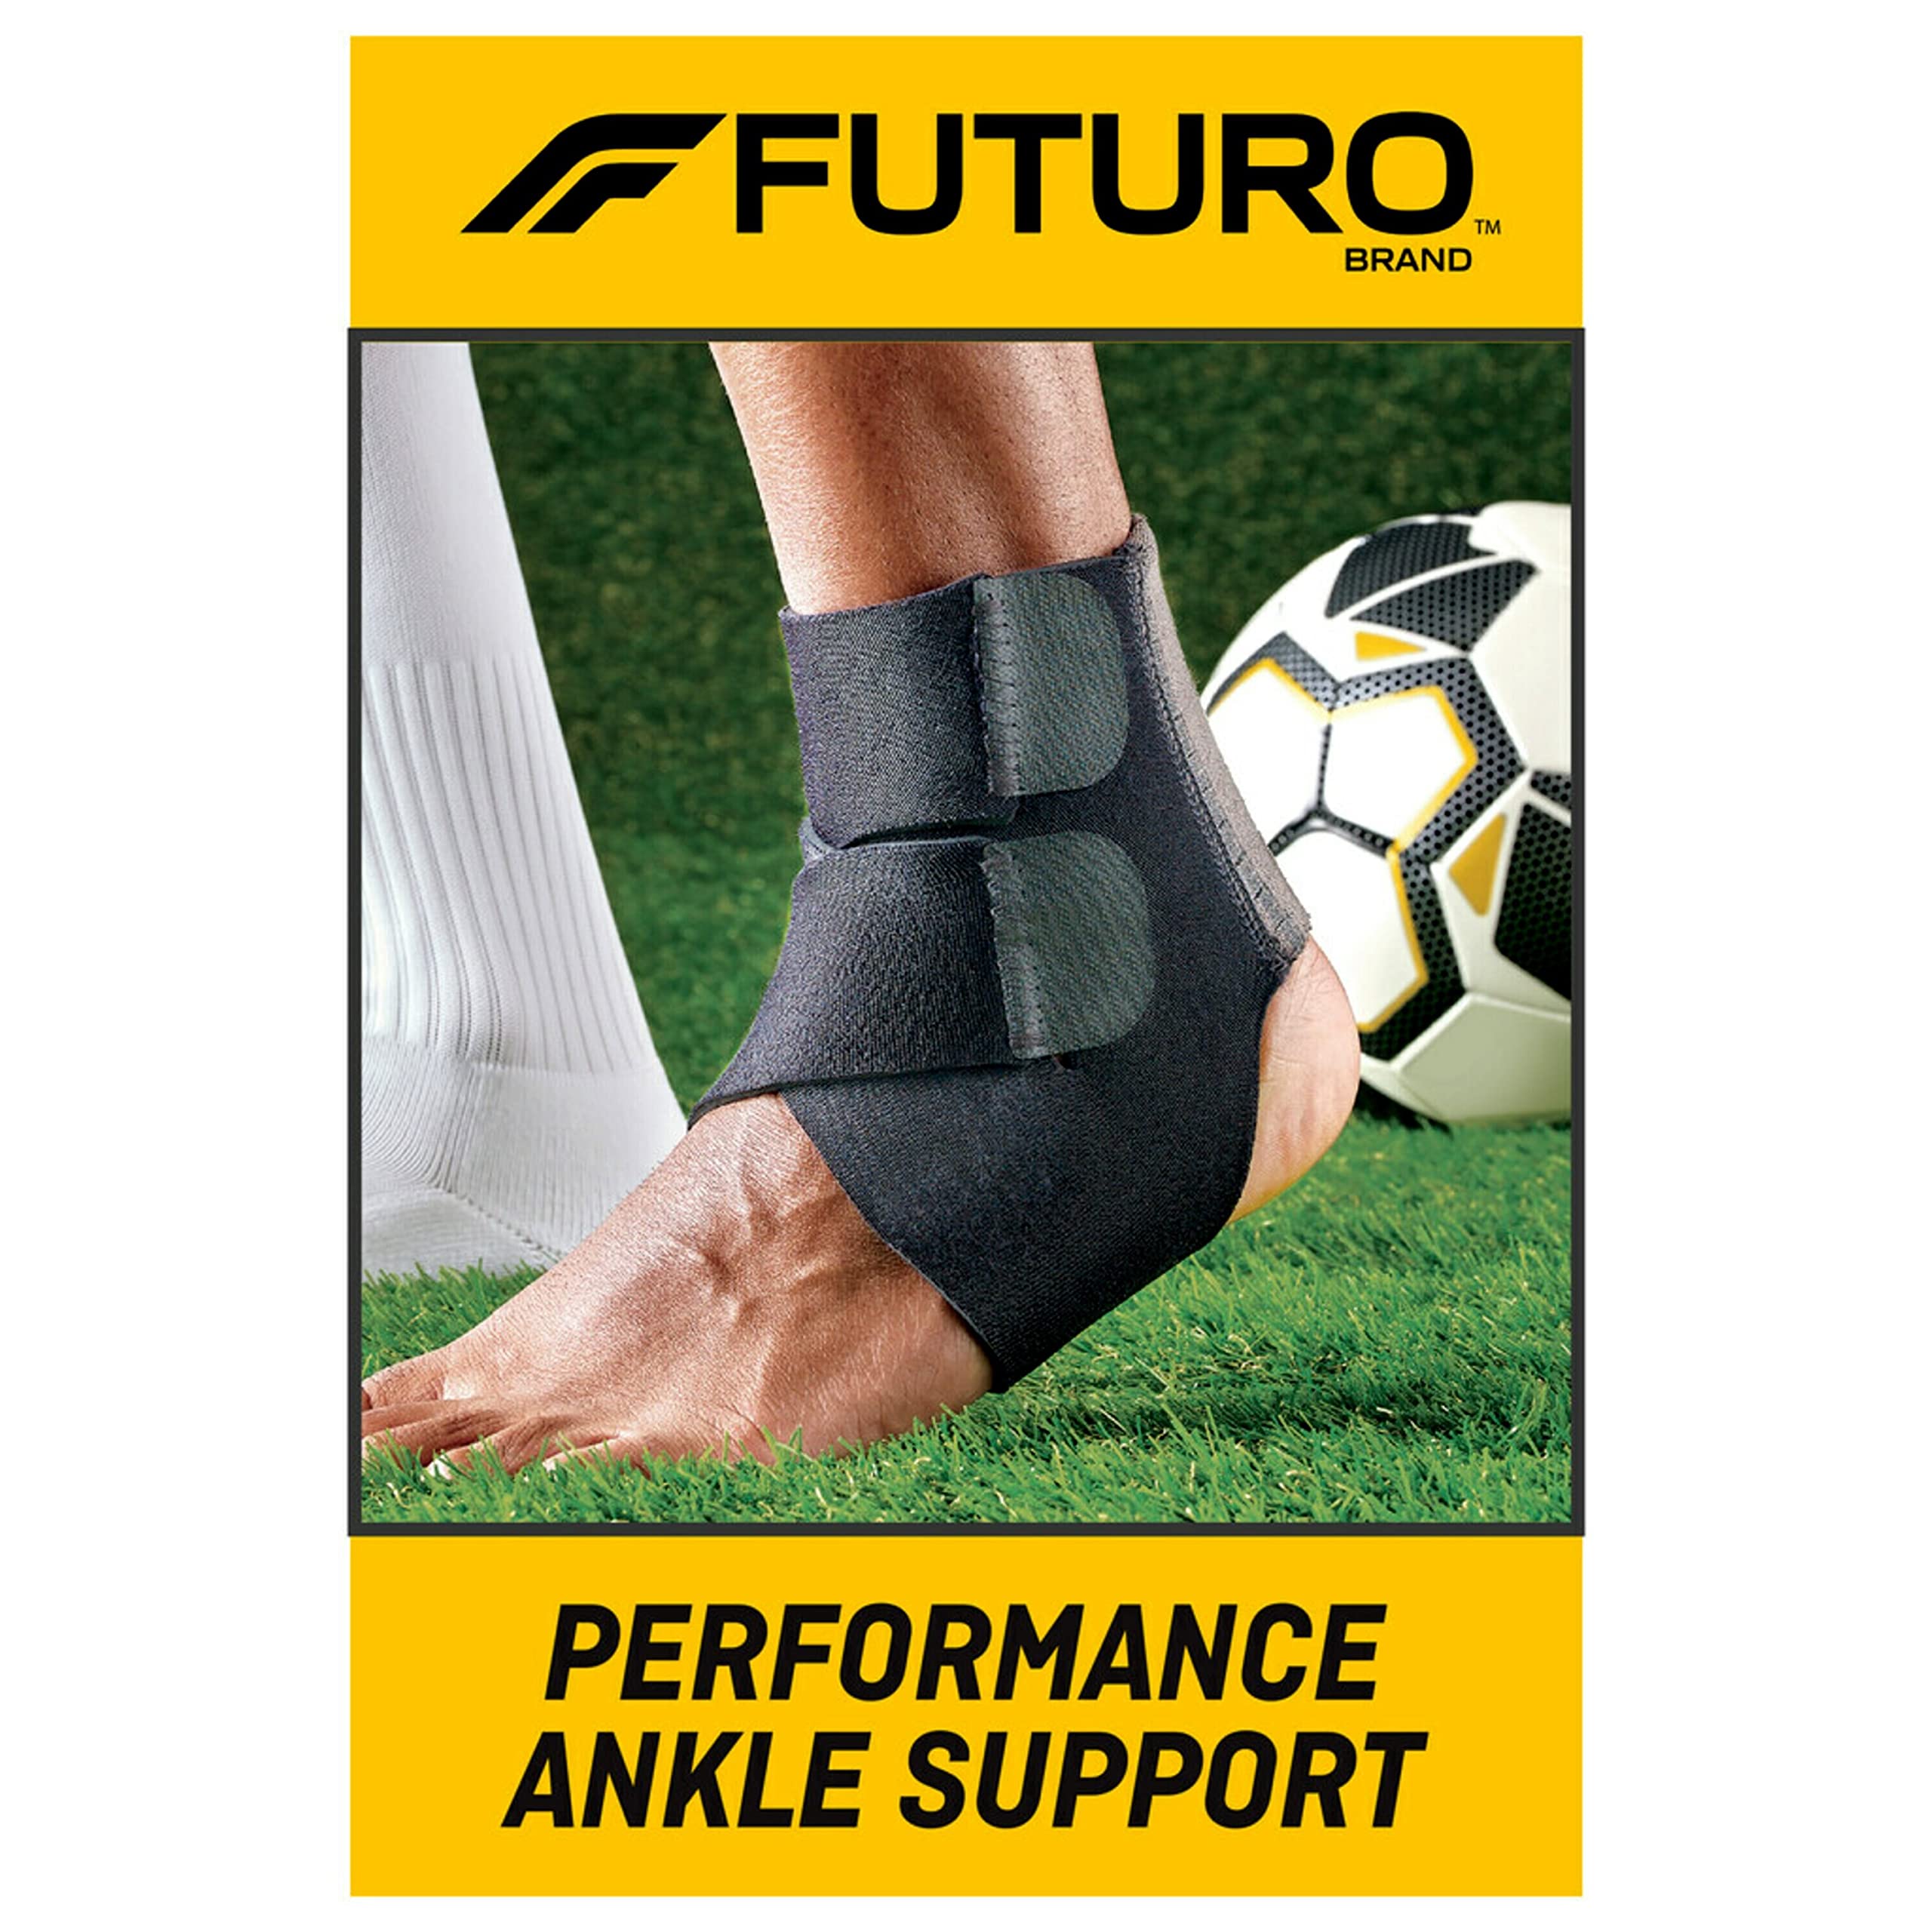 FUTURO Performance Ankle Support, Adjustable, Black, 1 Count (Pack of 1)